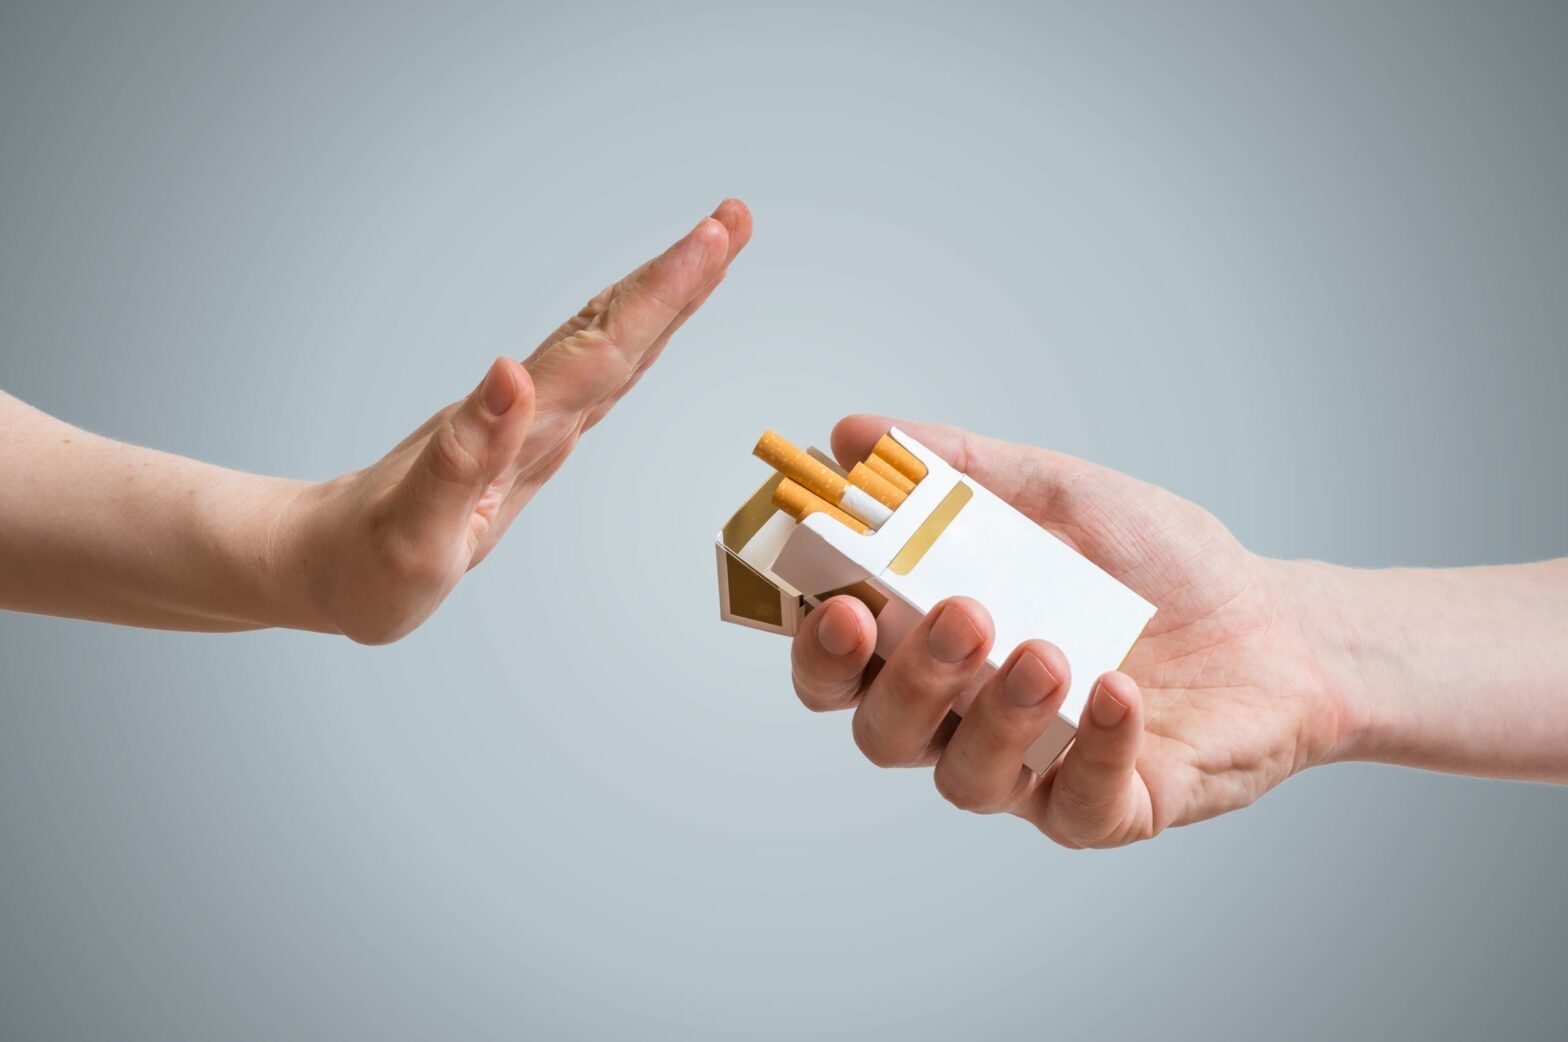 Little progress made by tobacco firms in harm reduction